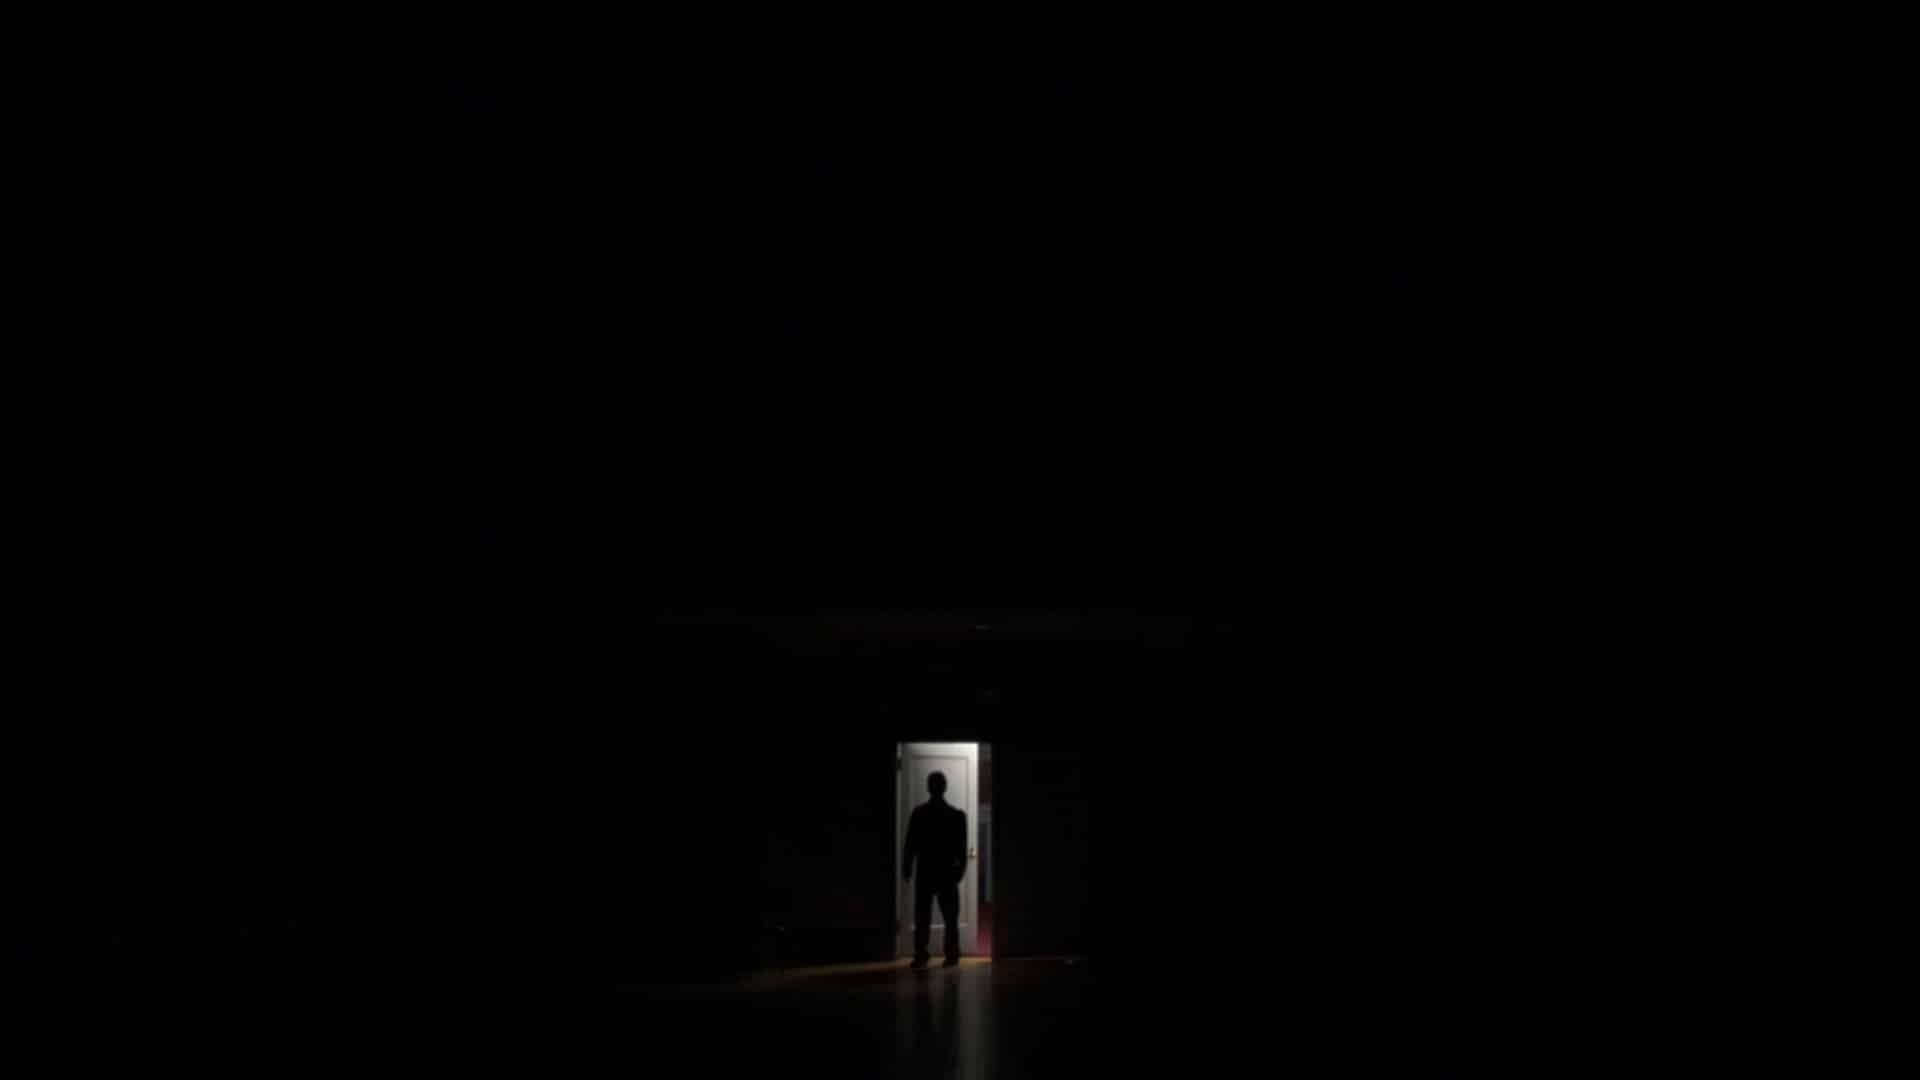 In this photograph, a Darkness can be seen, and a single boy is standing.